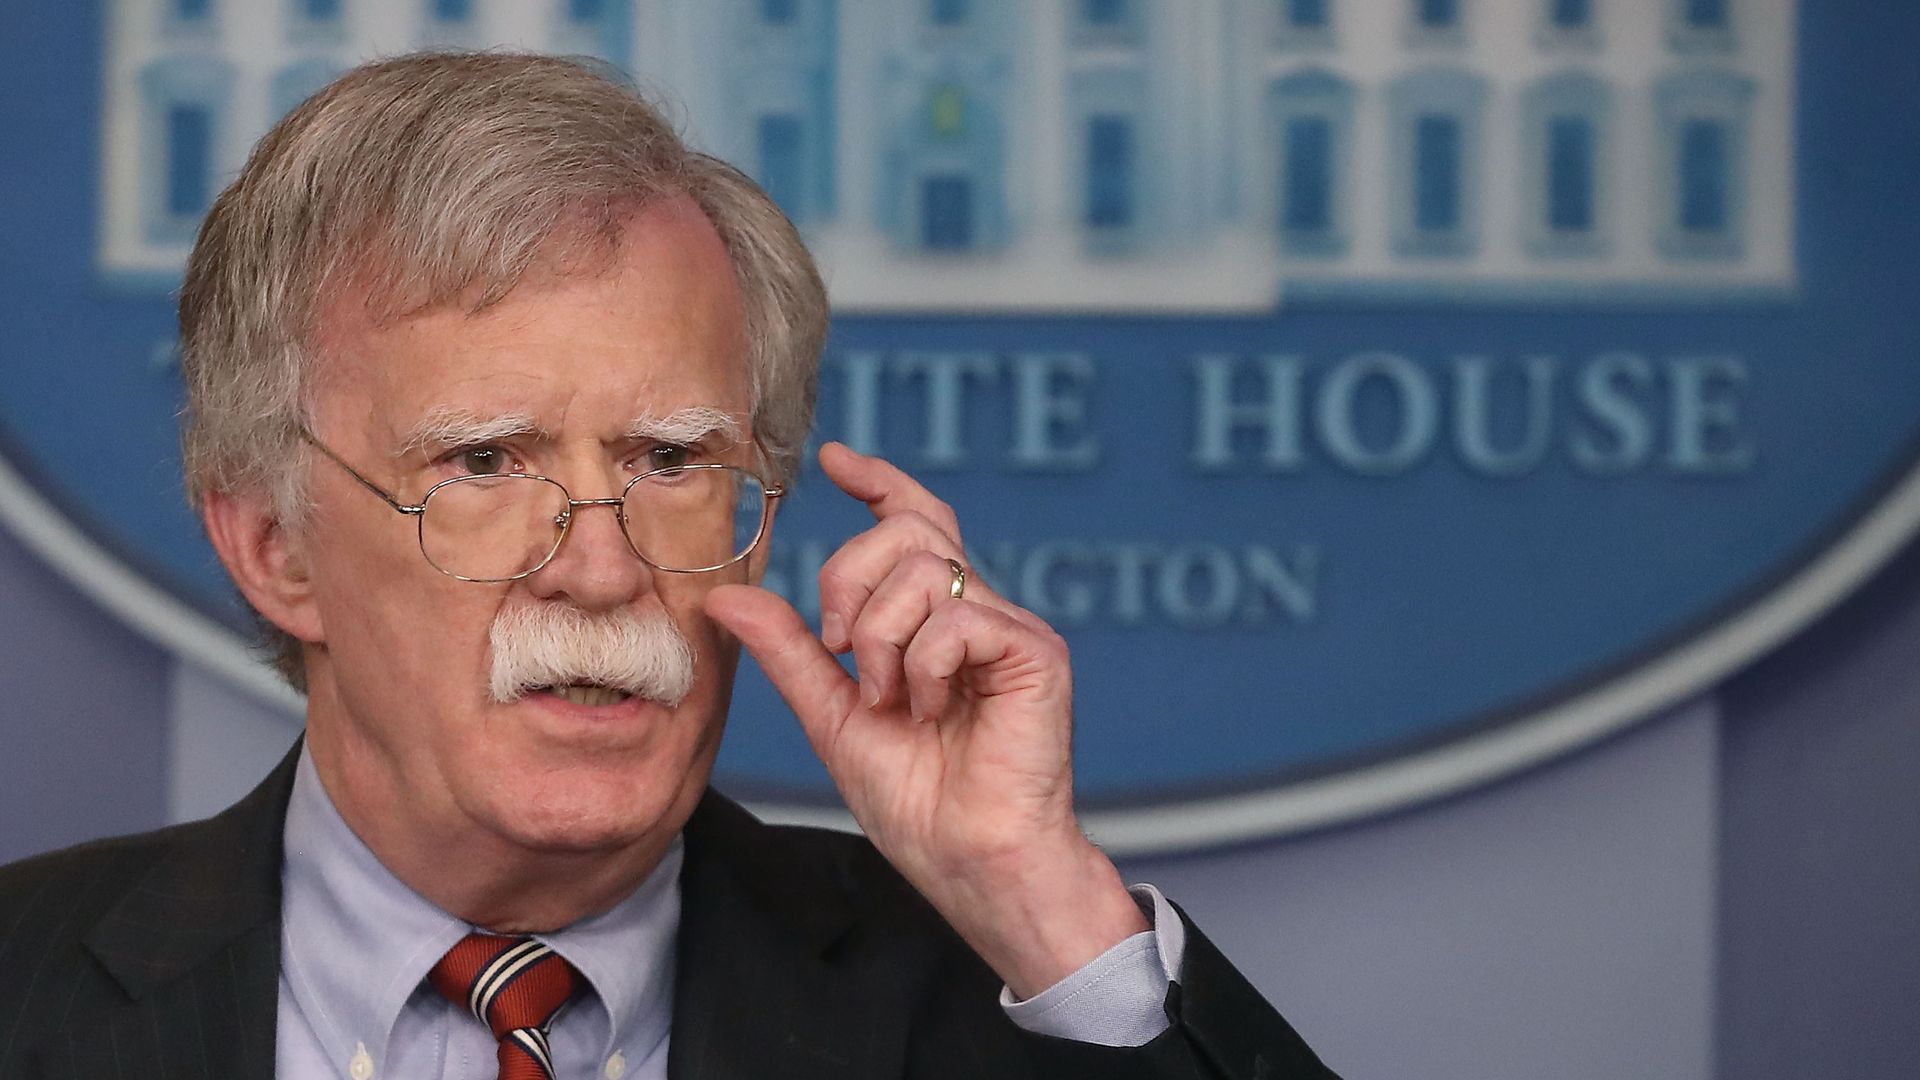 John Bolton at the White House, with his hand near his glasses